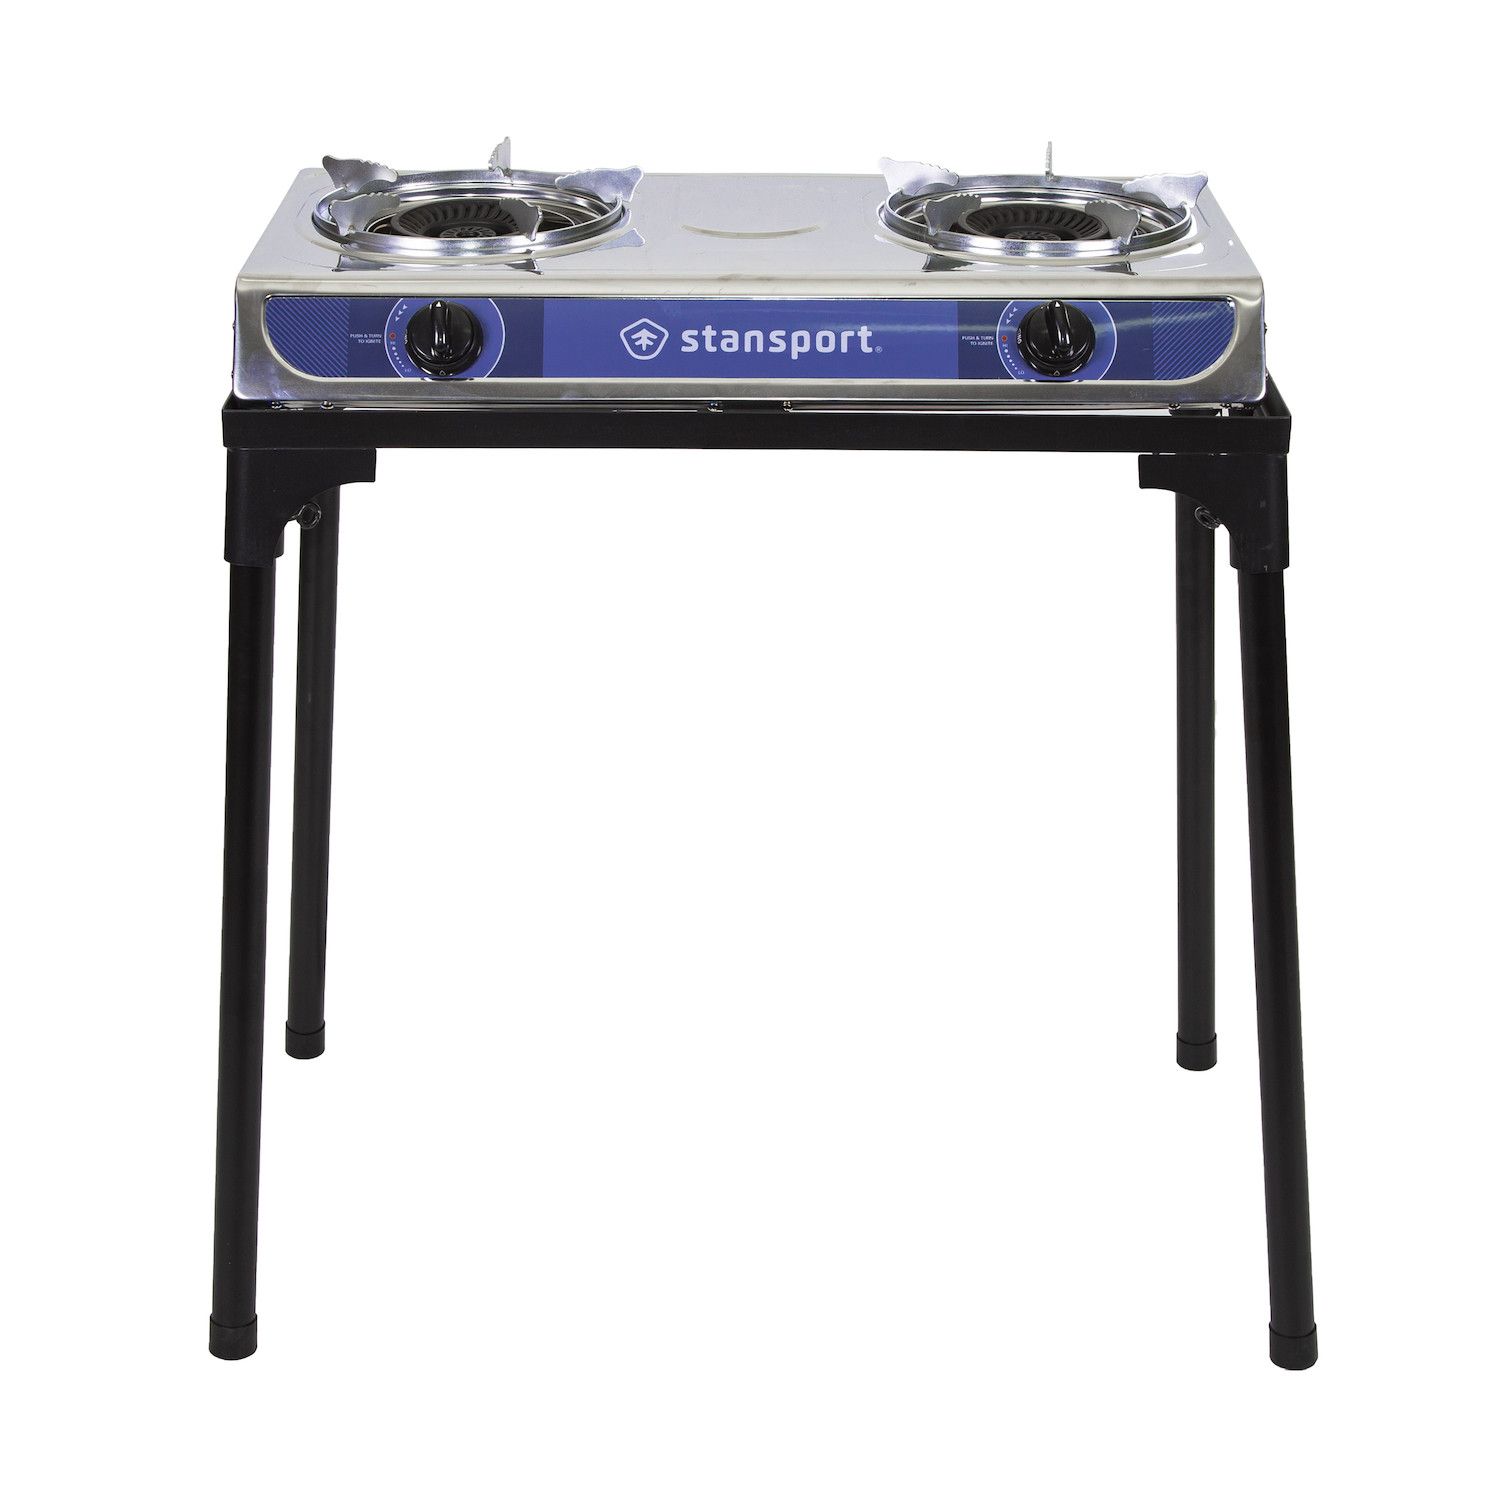 Stansport Outfitter Series 3 Burner Propane Stove